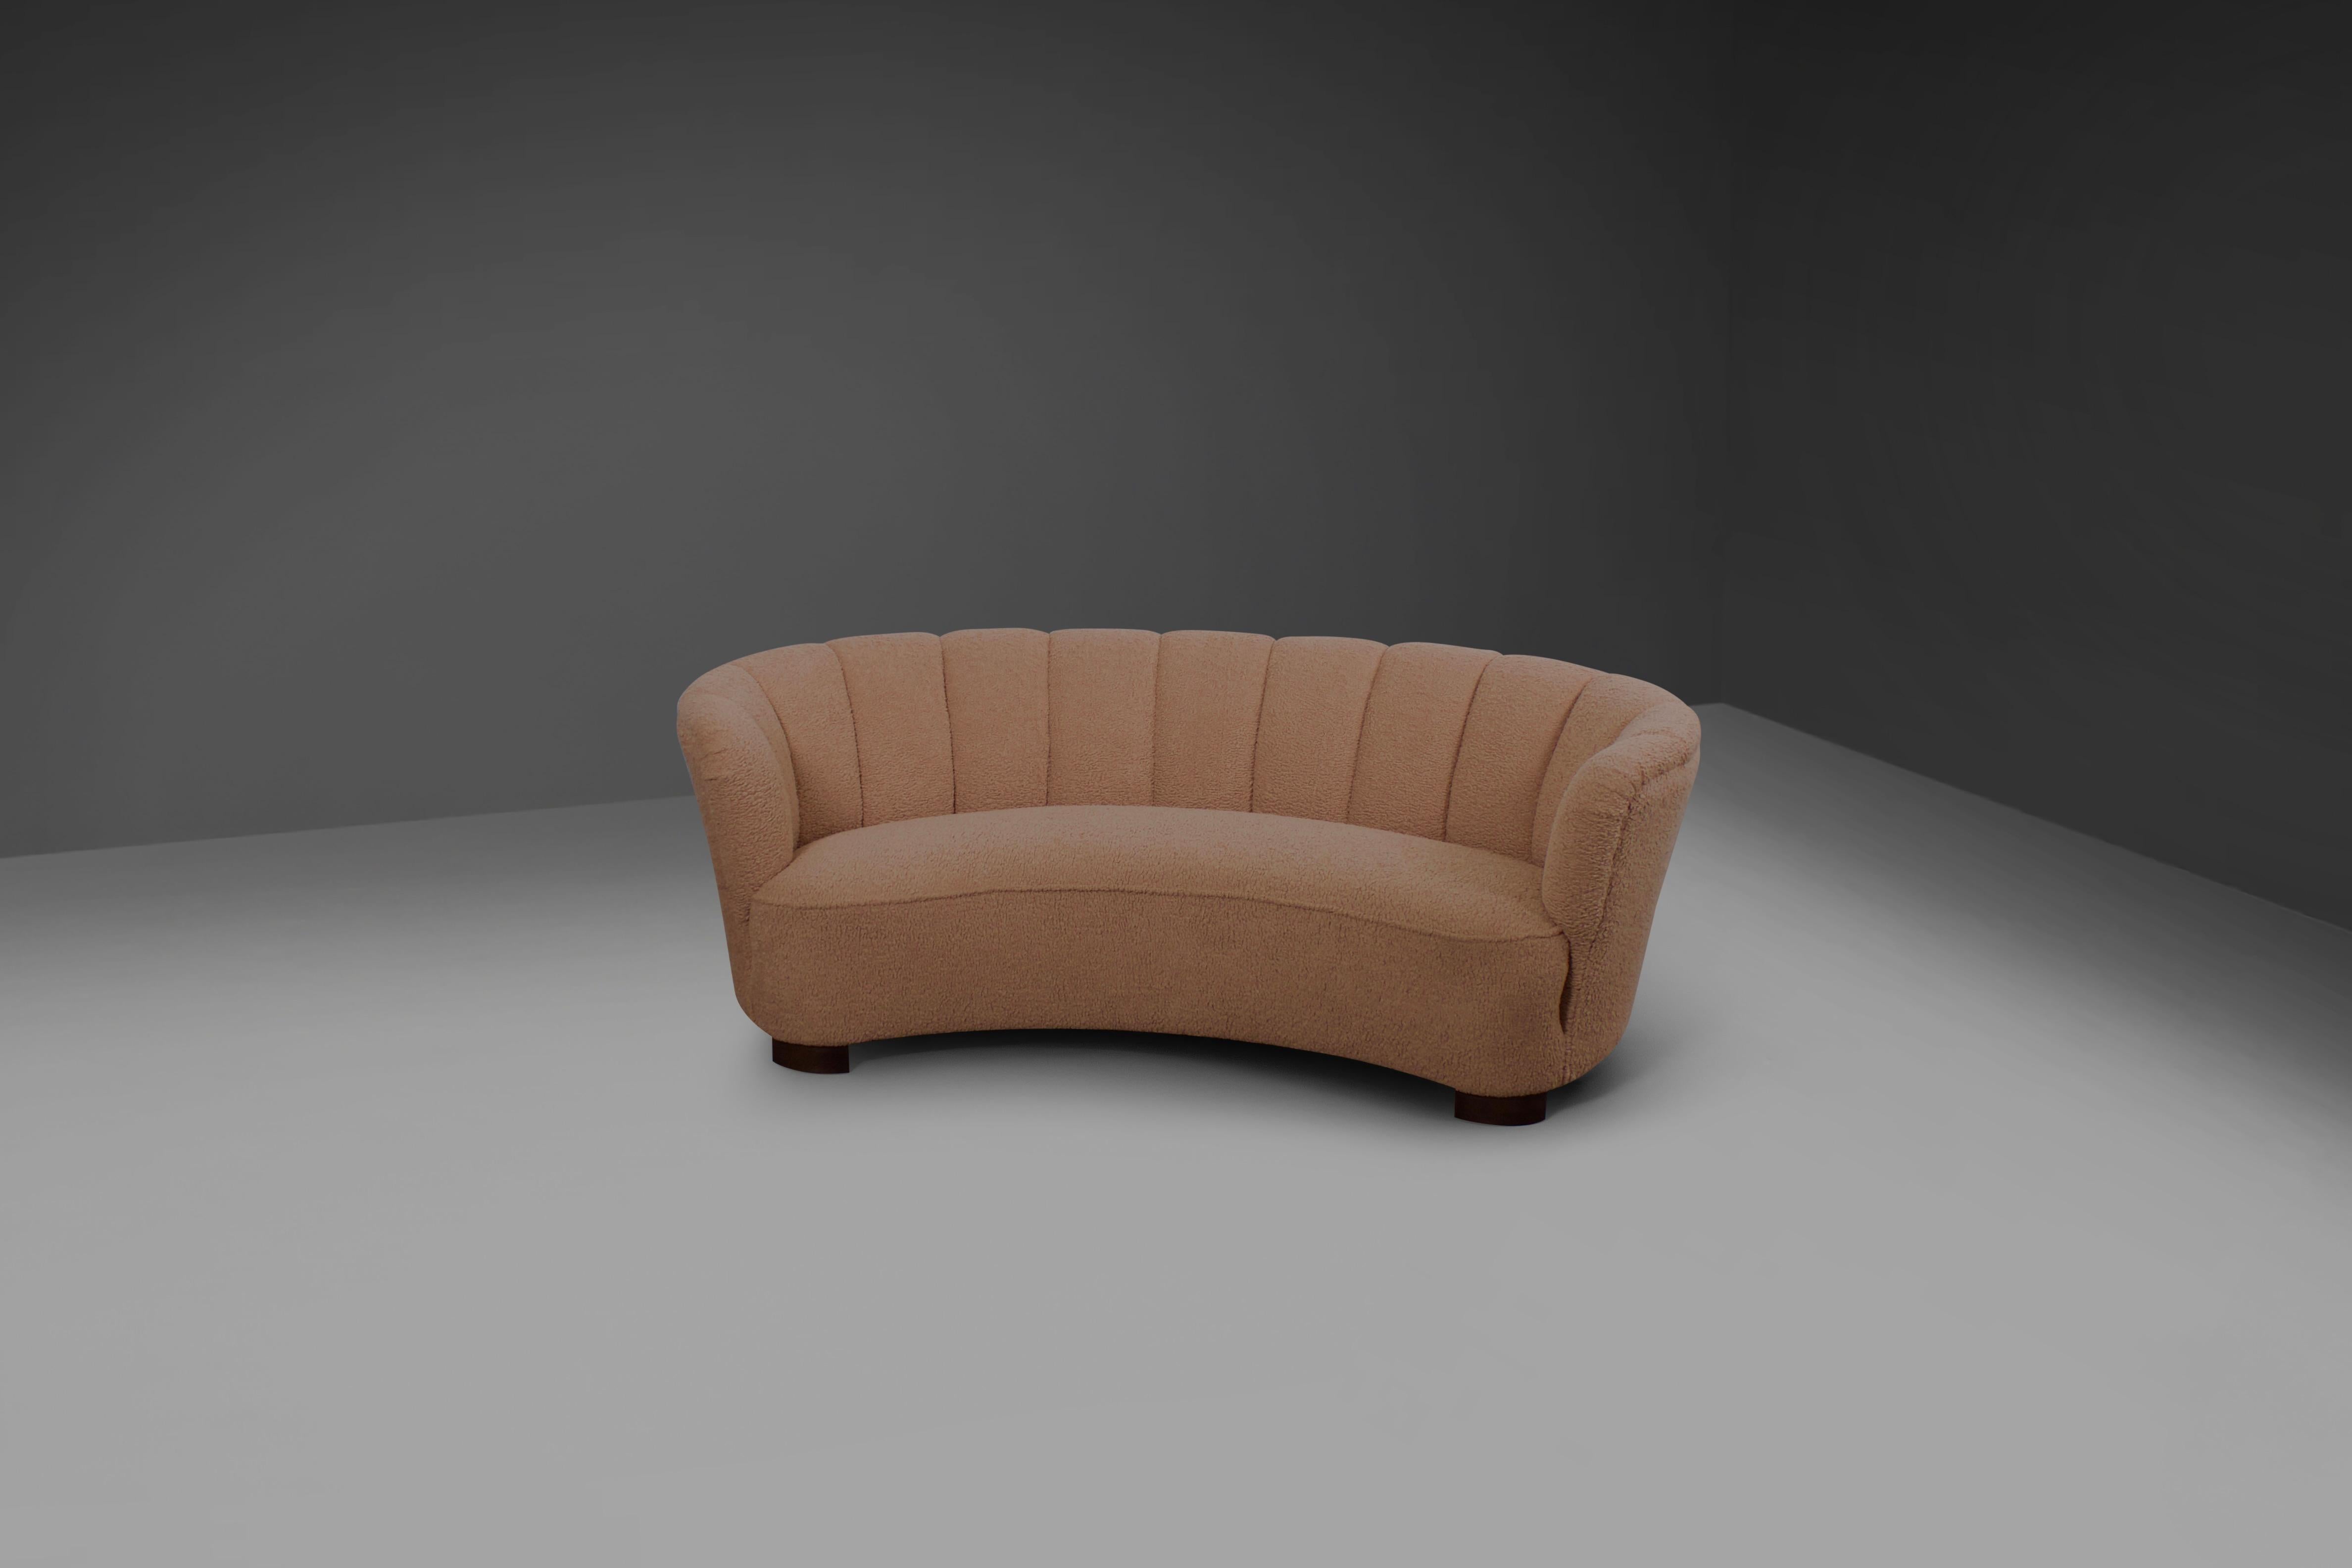 High quality Danish curved ‘banana’ sofa in excellent condition.

This sofa has beautiful organic lines and a voluptuous appearance.

It is fully refurbished and professionally reupholstered in a thick wool fabric.

The fabric has a shearling look